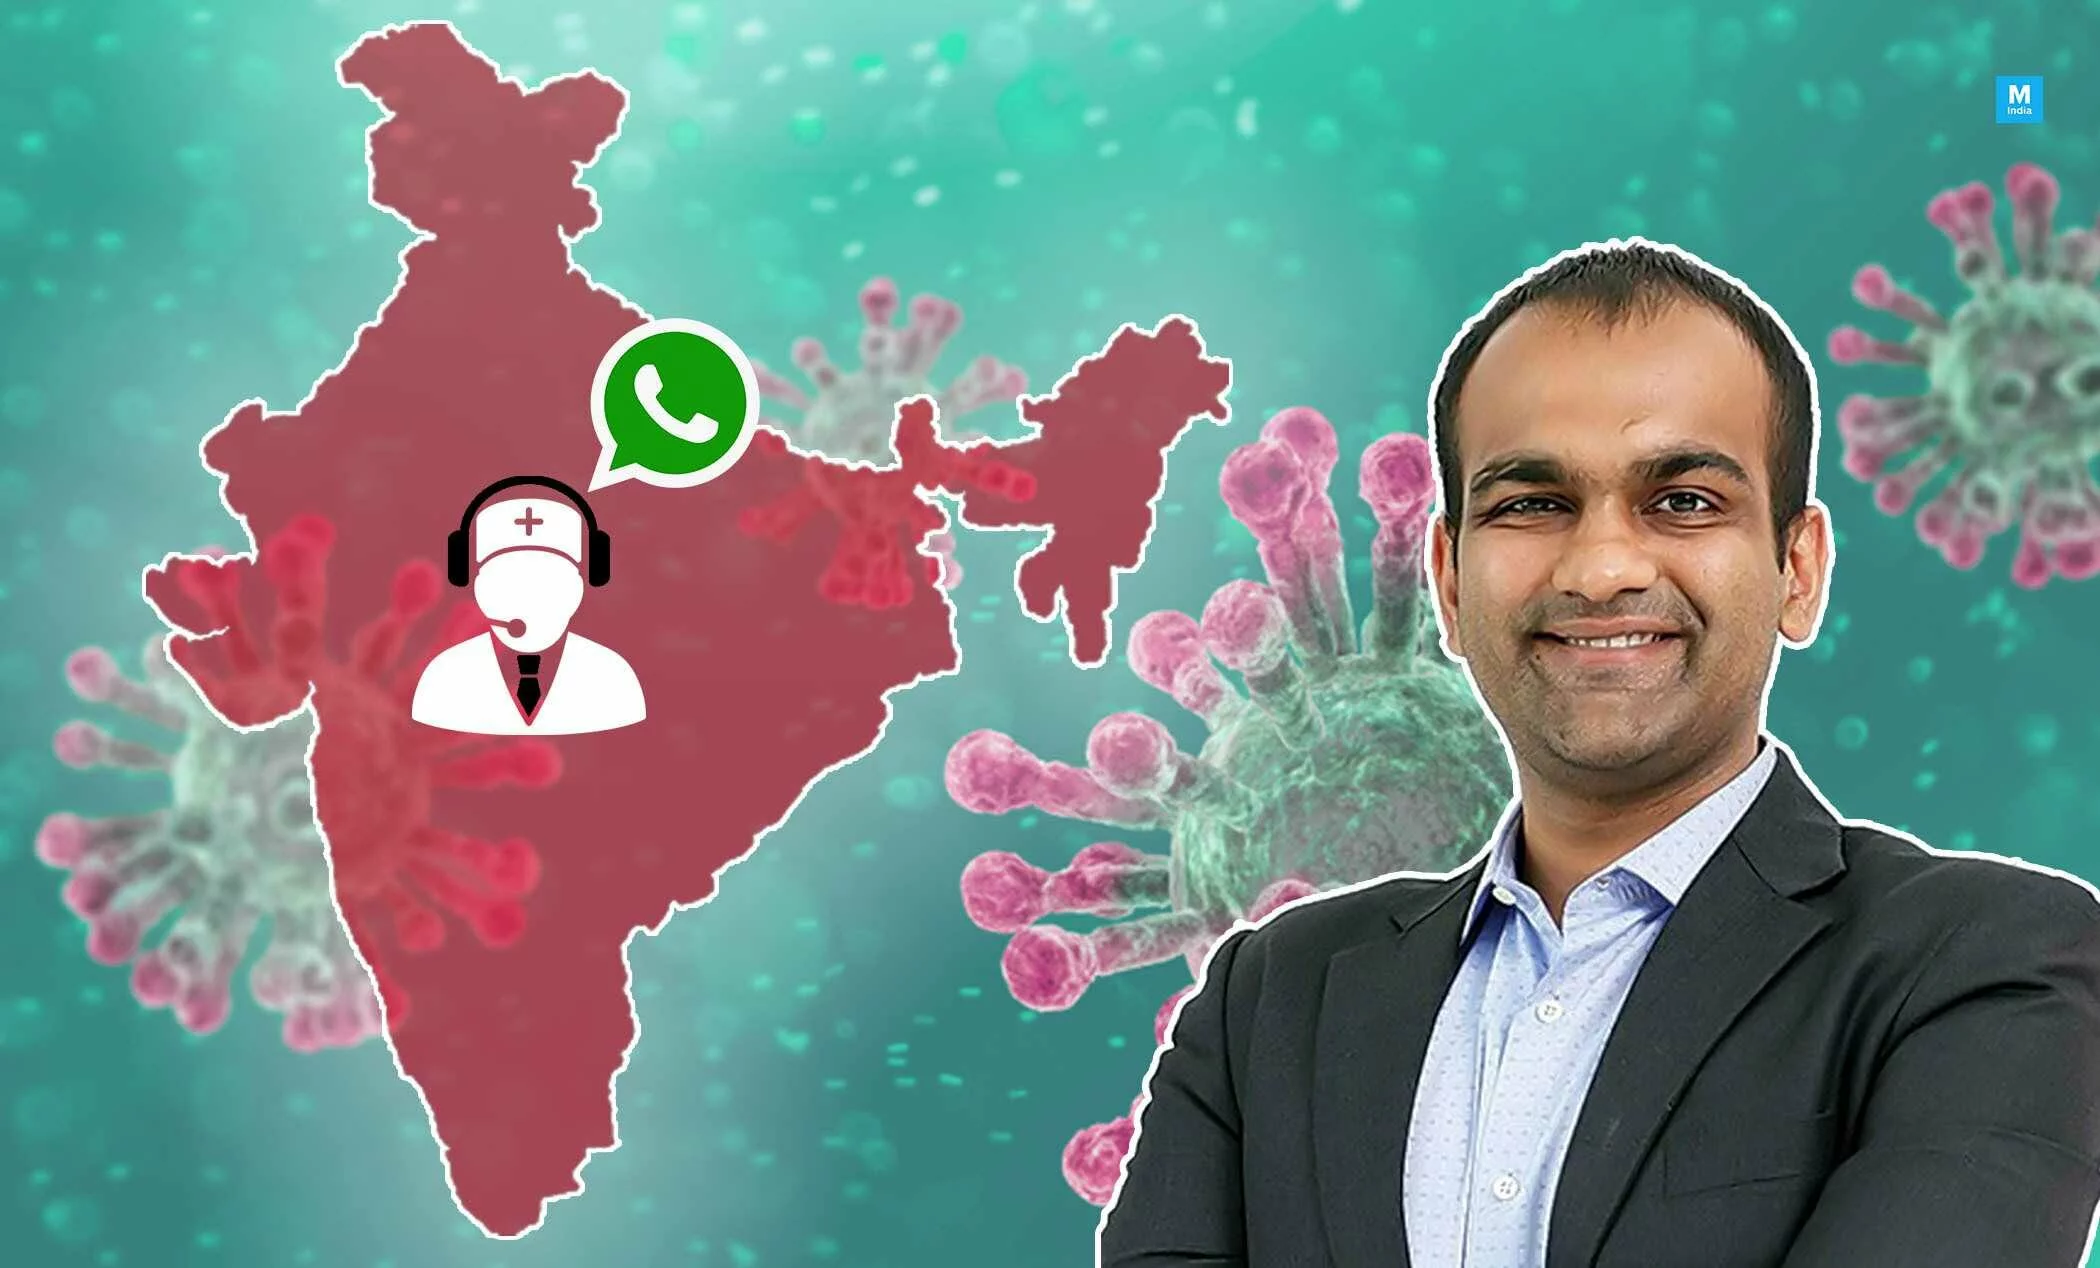 In an interview with Mashable India, Haptik Founder Aakrit Vaish tells us about the inner working of the MyGov Corona WhatsApp chatbot and how it was made.